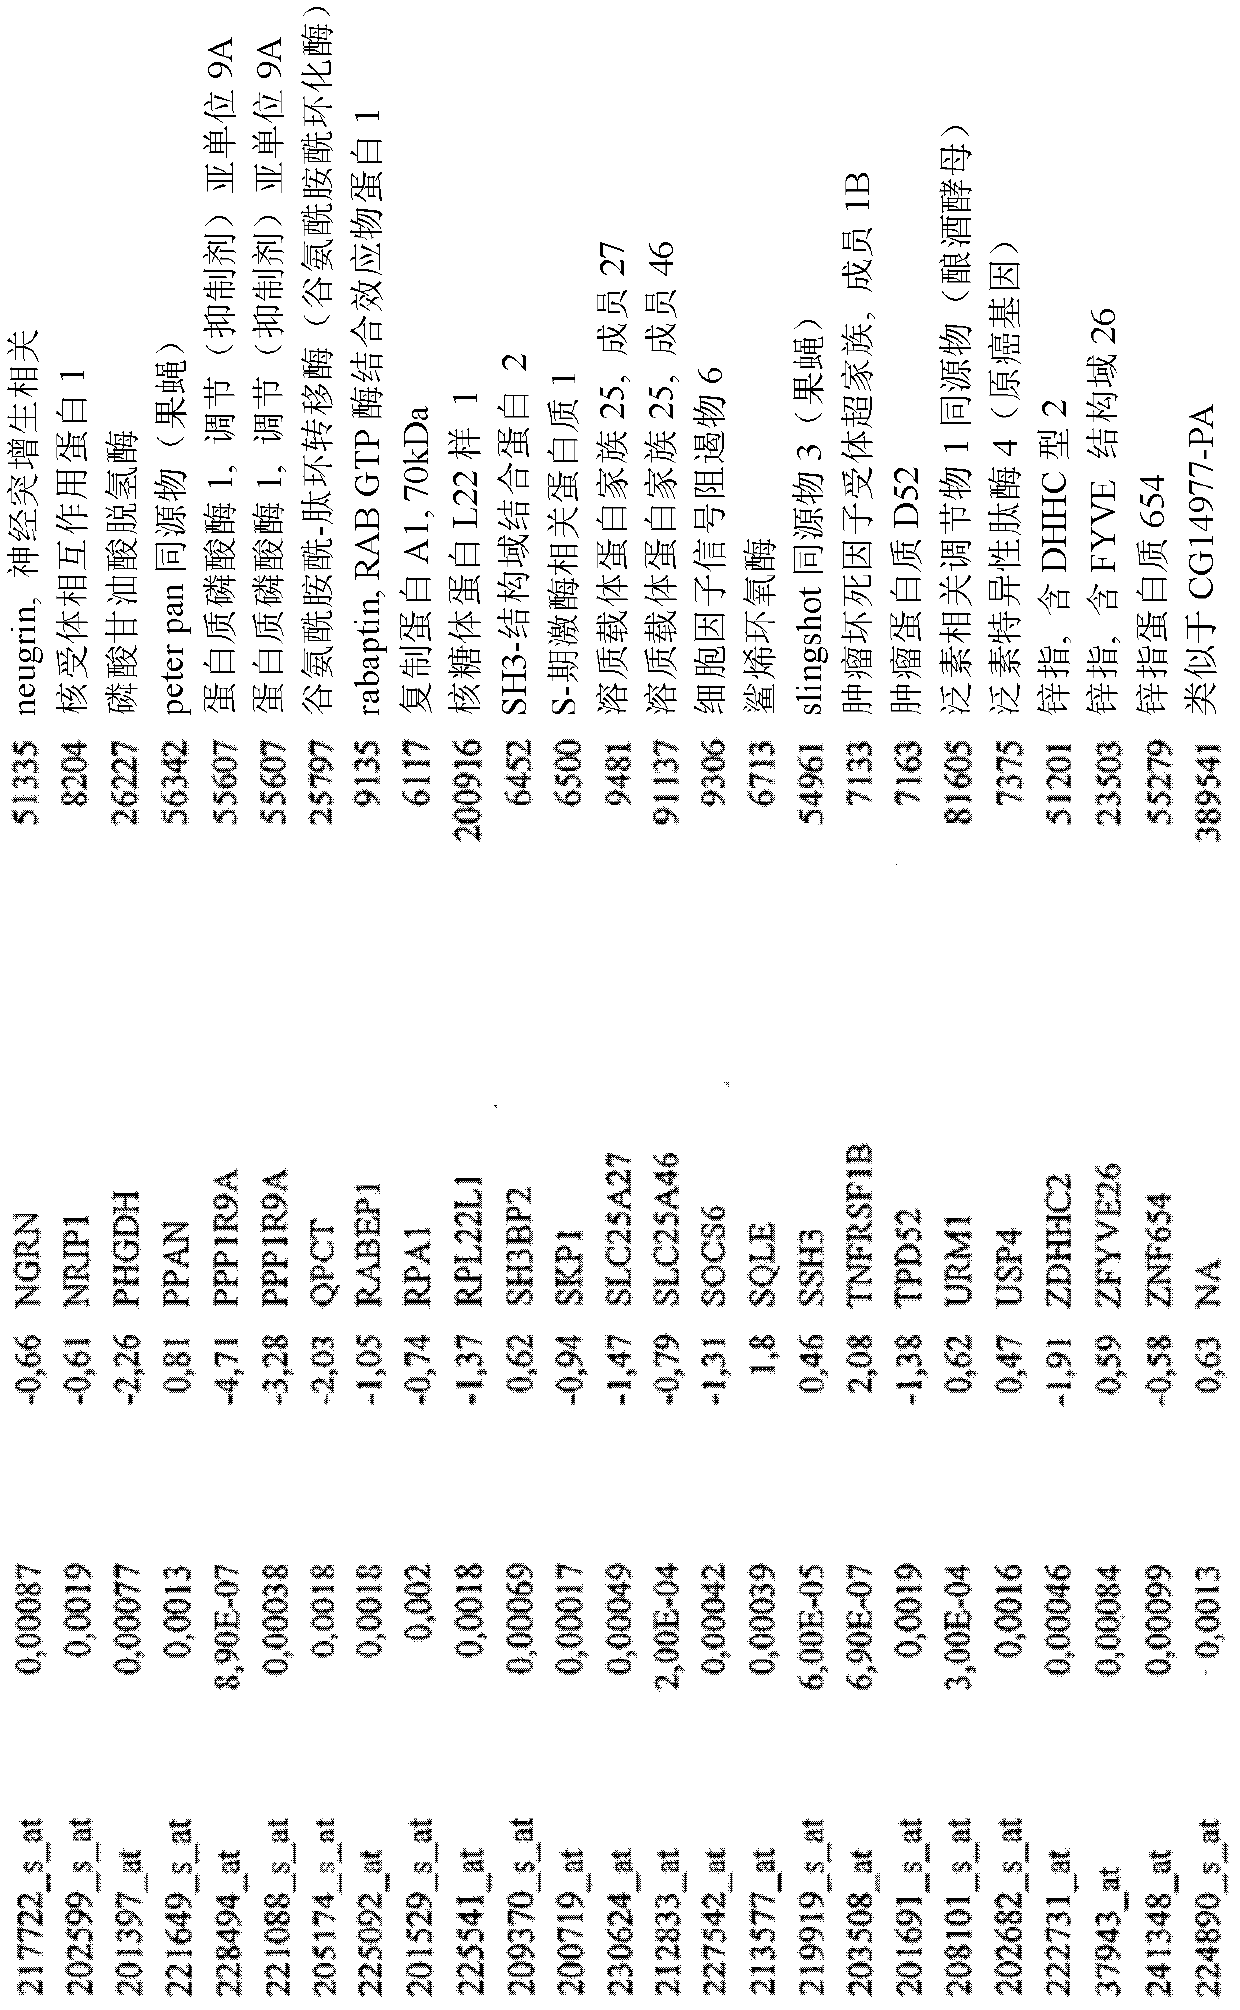 Biomarkers and methods for determining efficacy of anti-egfr antibodies in cancer therapy